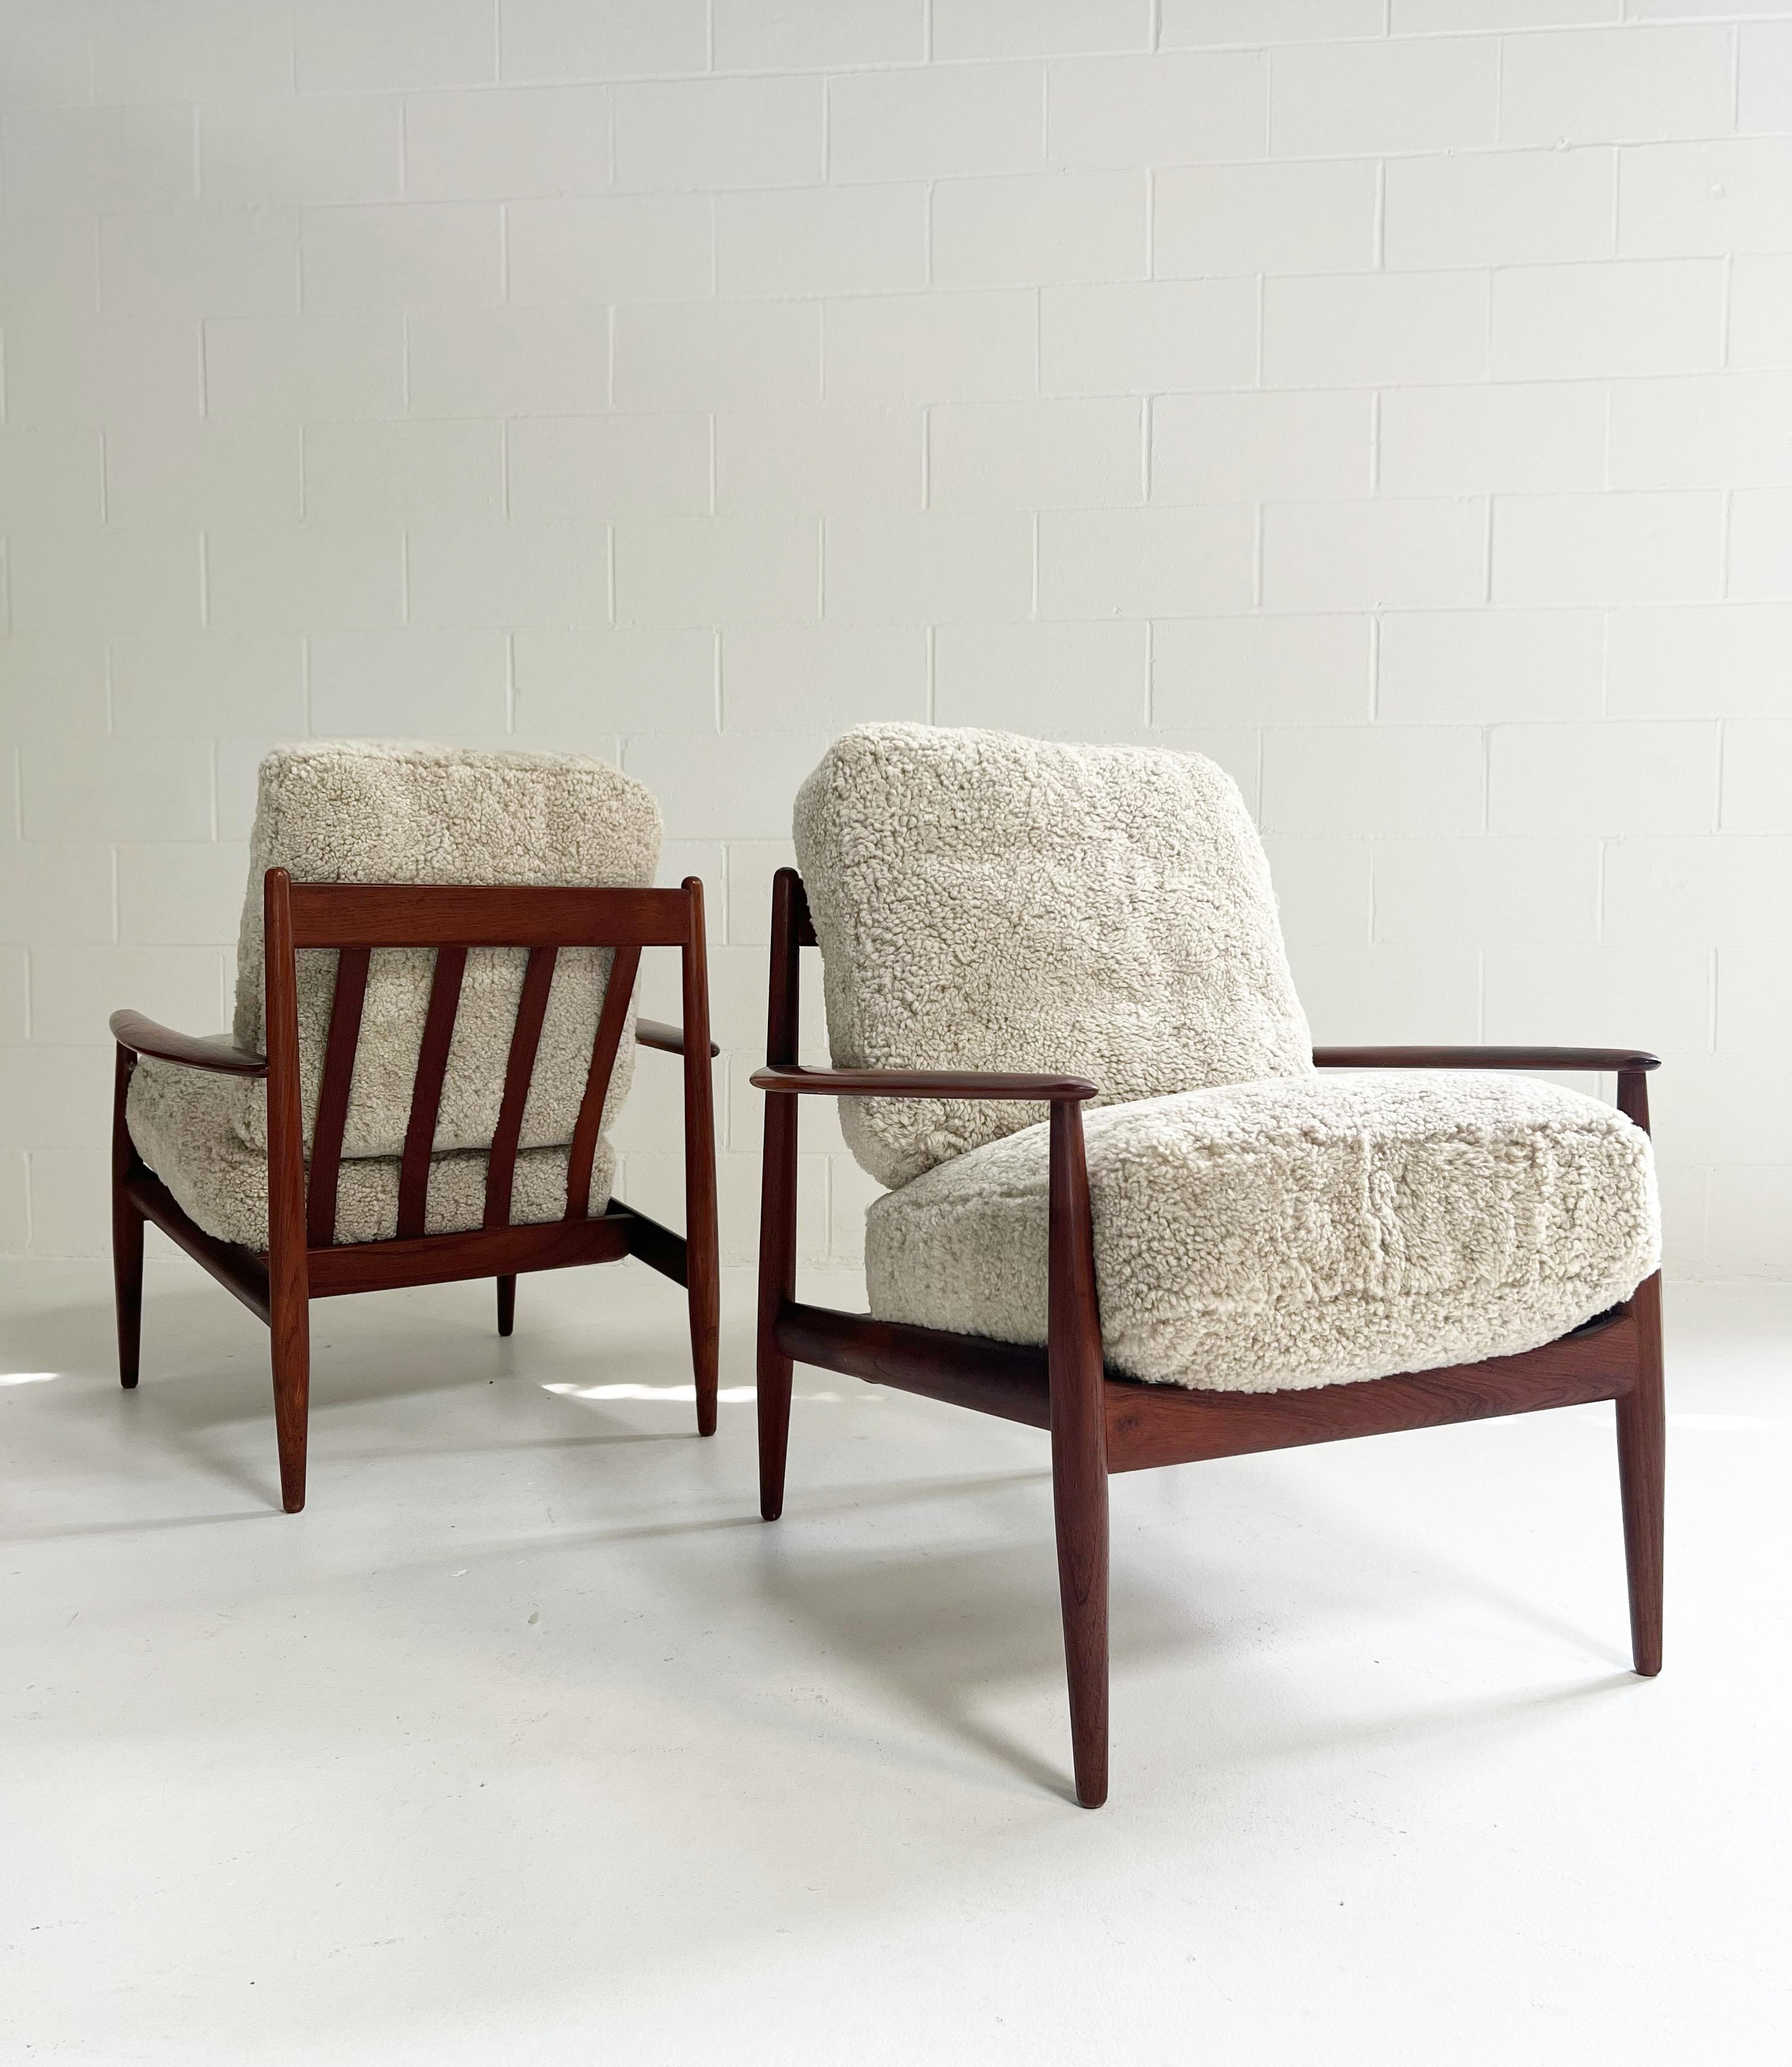 Mid-20th Century Grete Jalk Model 118 Lounge Chairs in Shearling, Pair